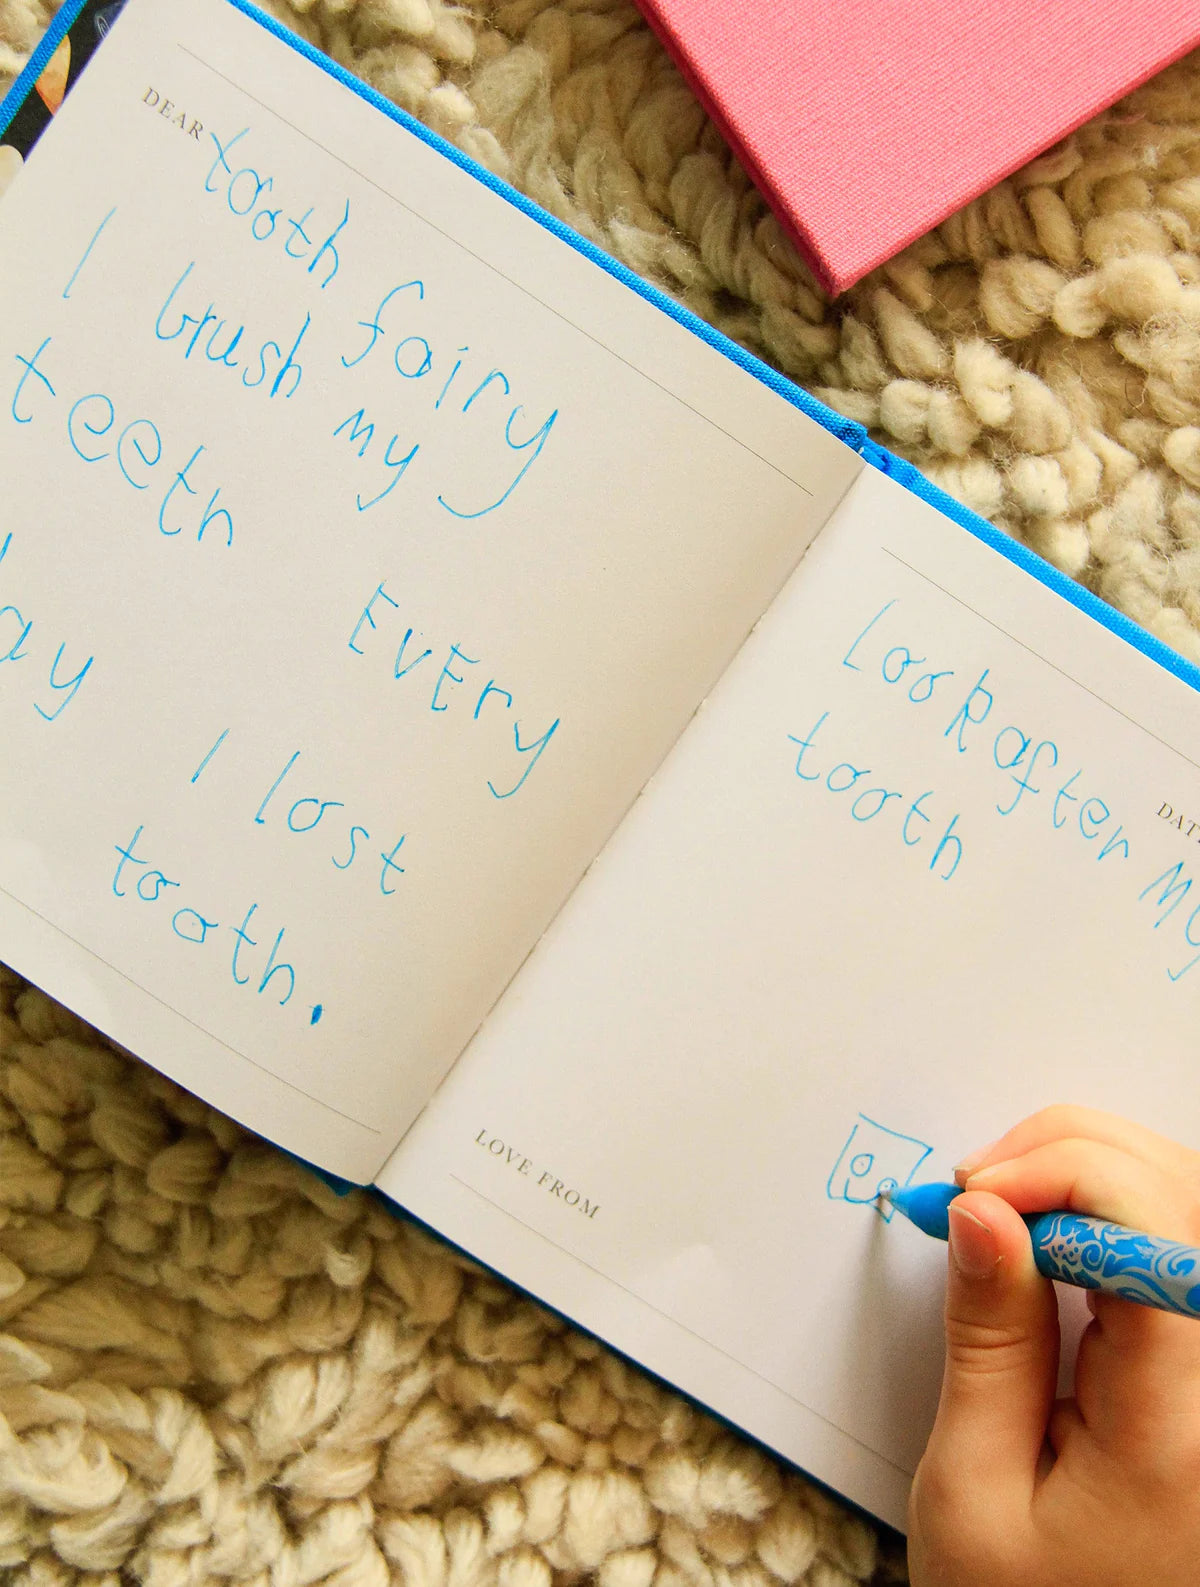 Tooth Fairy Letters